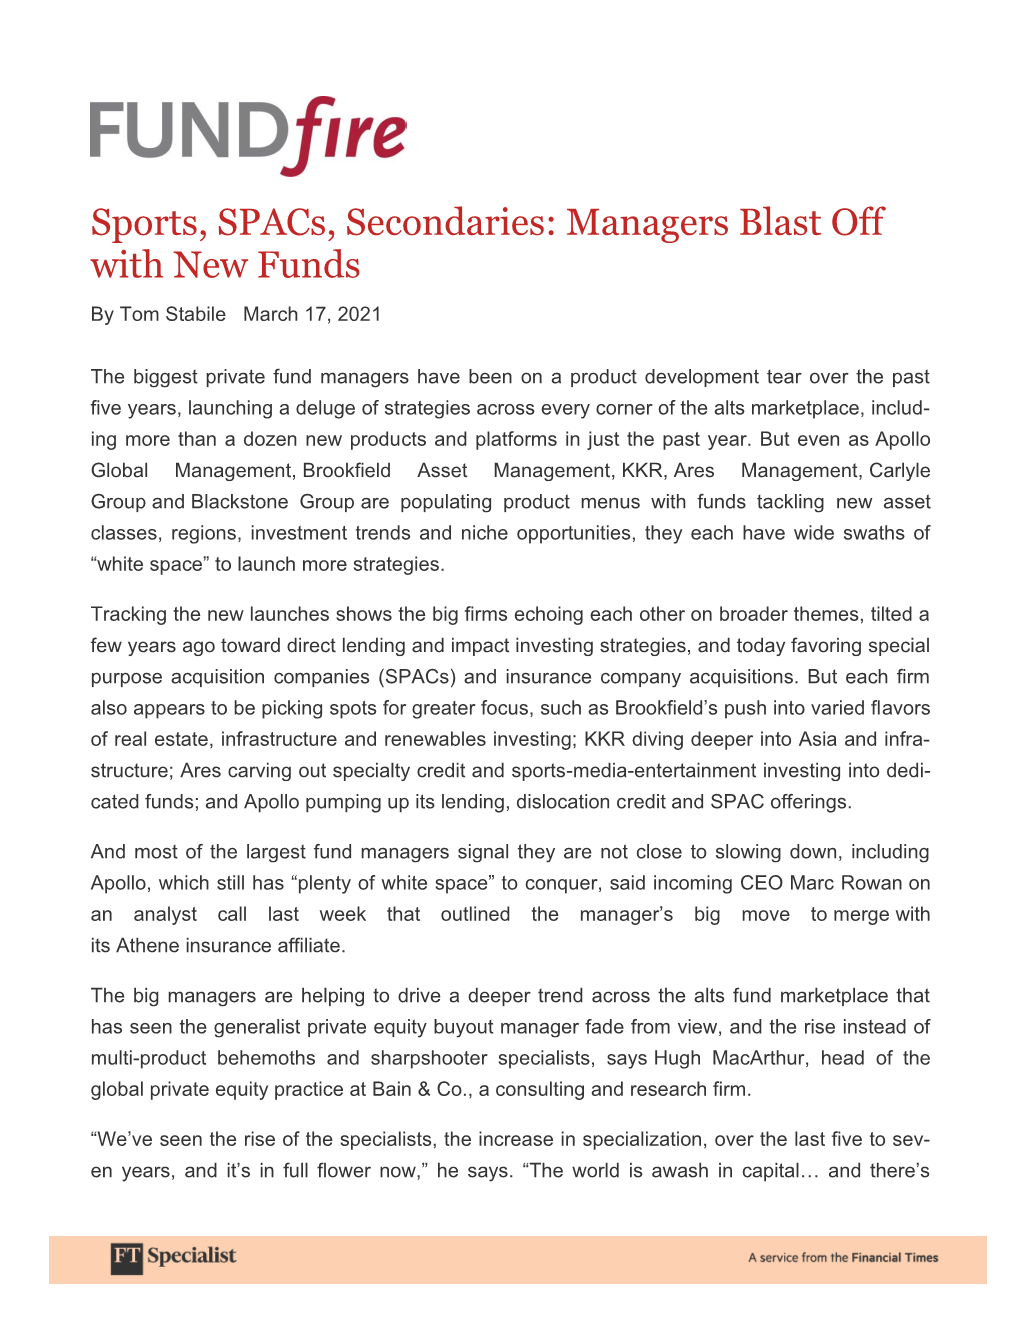 Sports, Spacs, Secondaries: Managers Blast Off with New Funds by Tom Stabile March 17, 2021